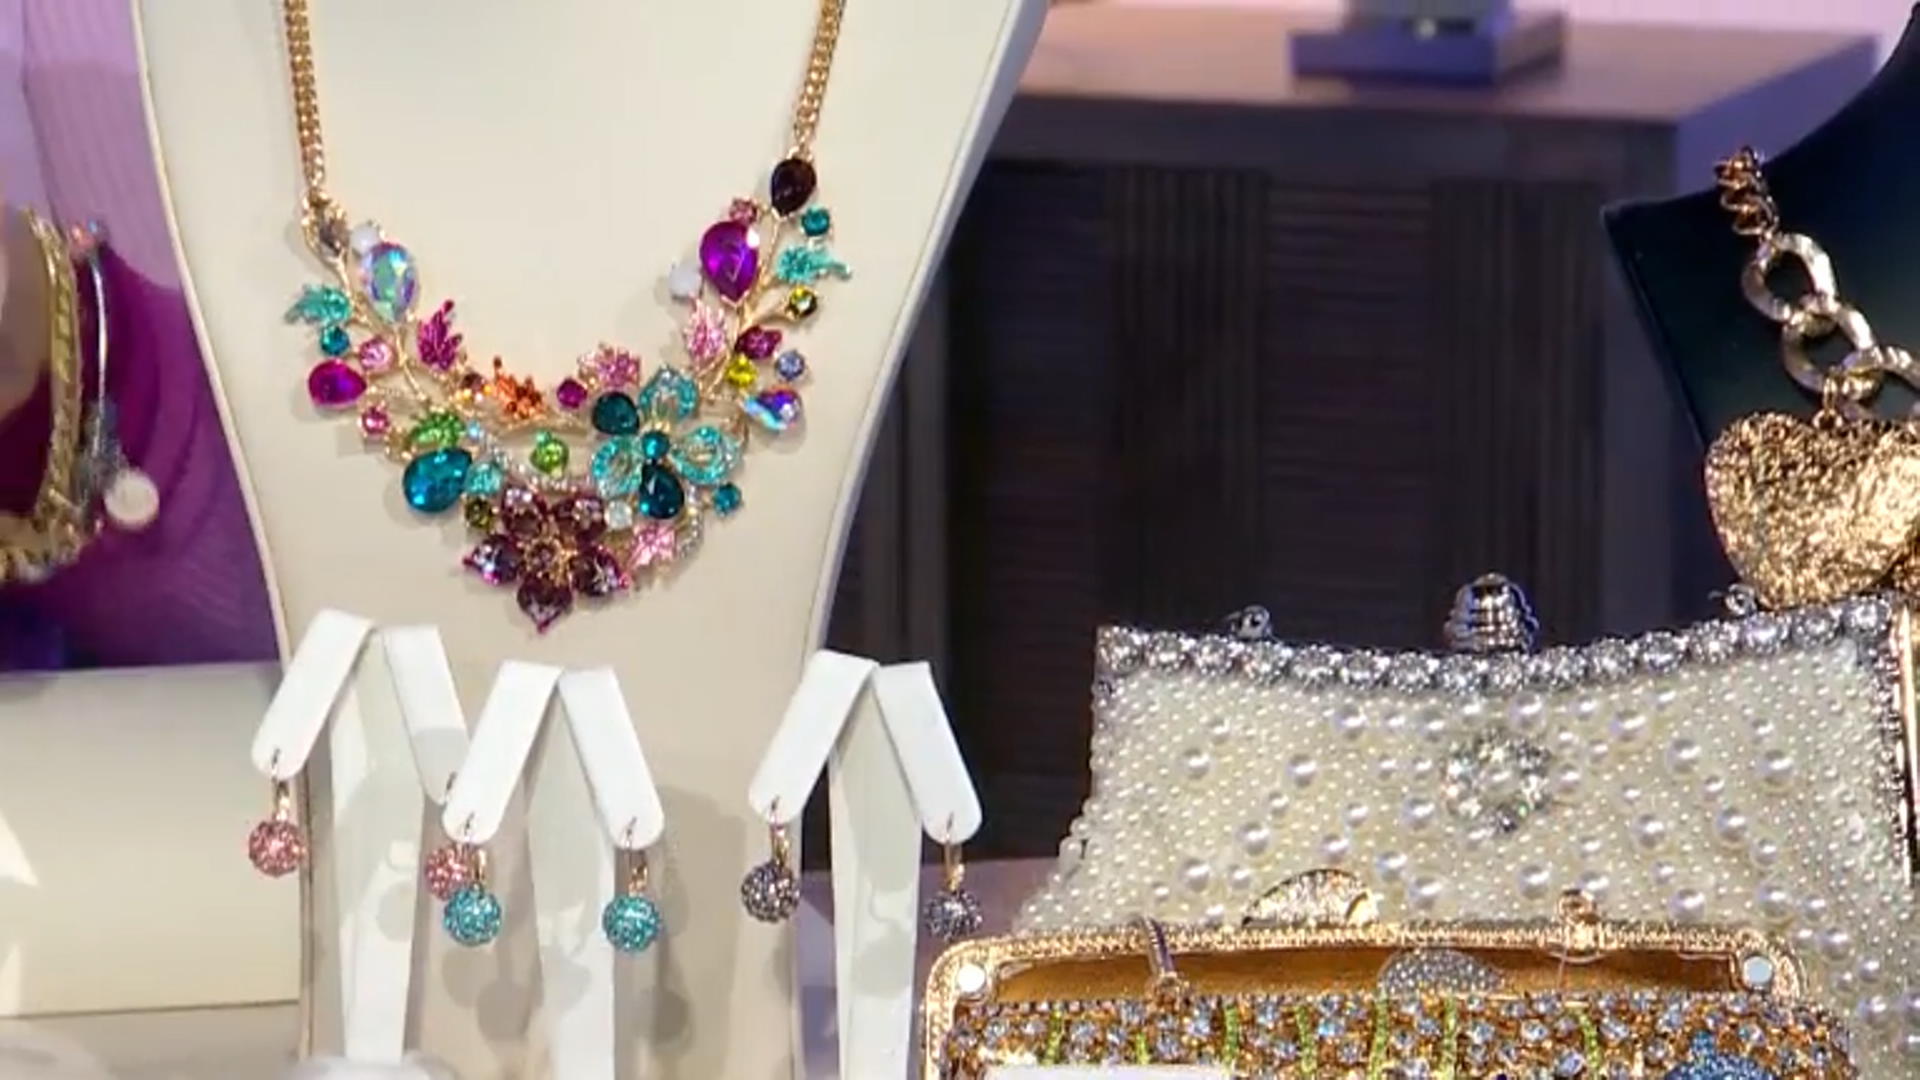 Multicolor Crystal Gold Tone Floral Statement Necklace Video Thumbnail